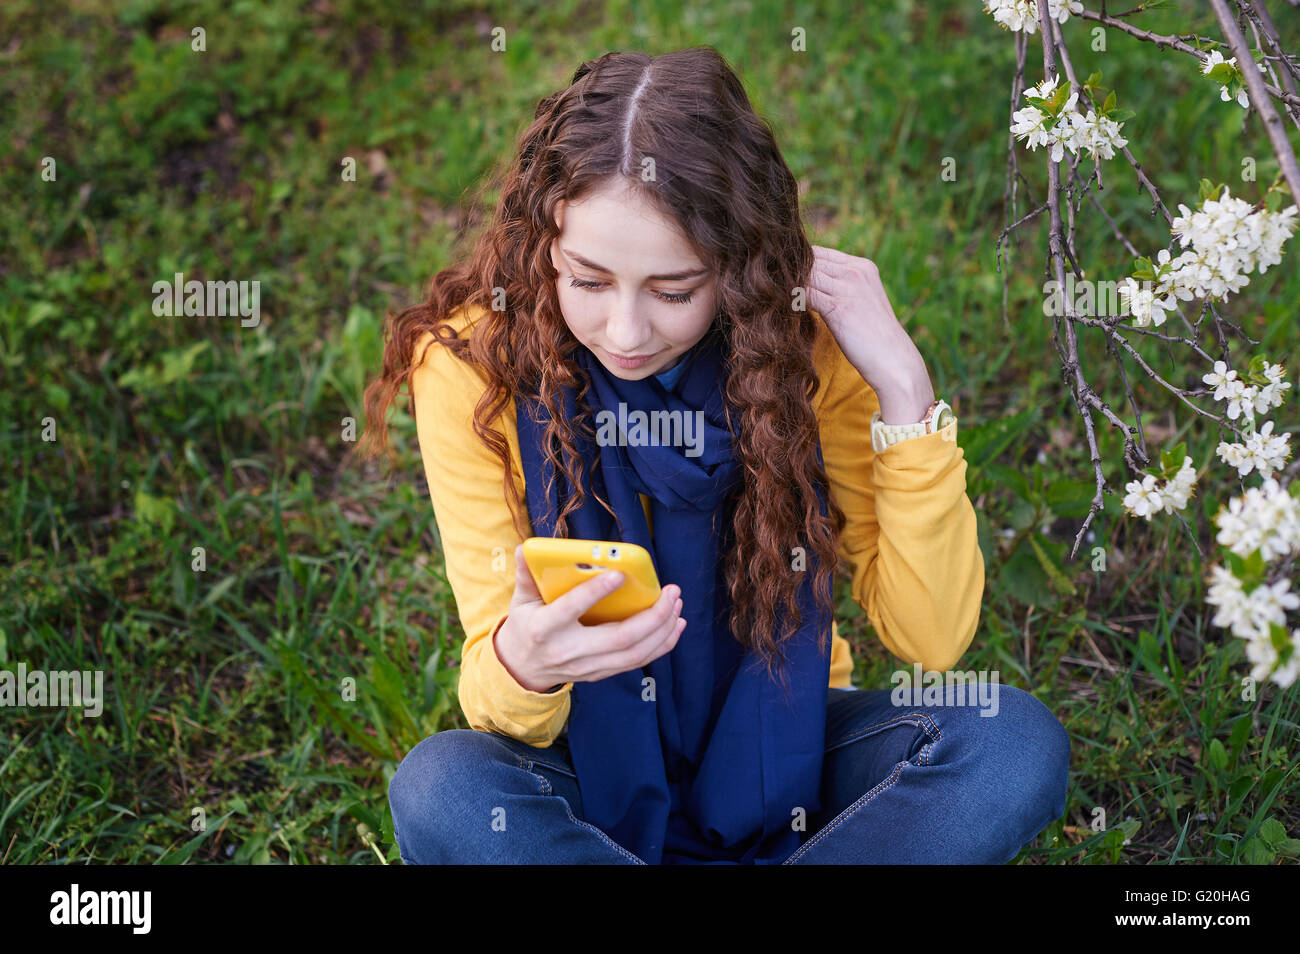 young woman in the blossoming spring garden with smartphone Stock Photo